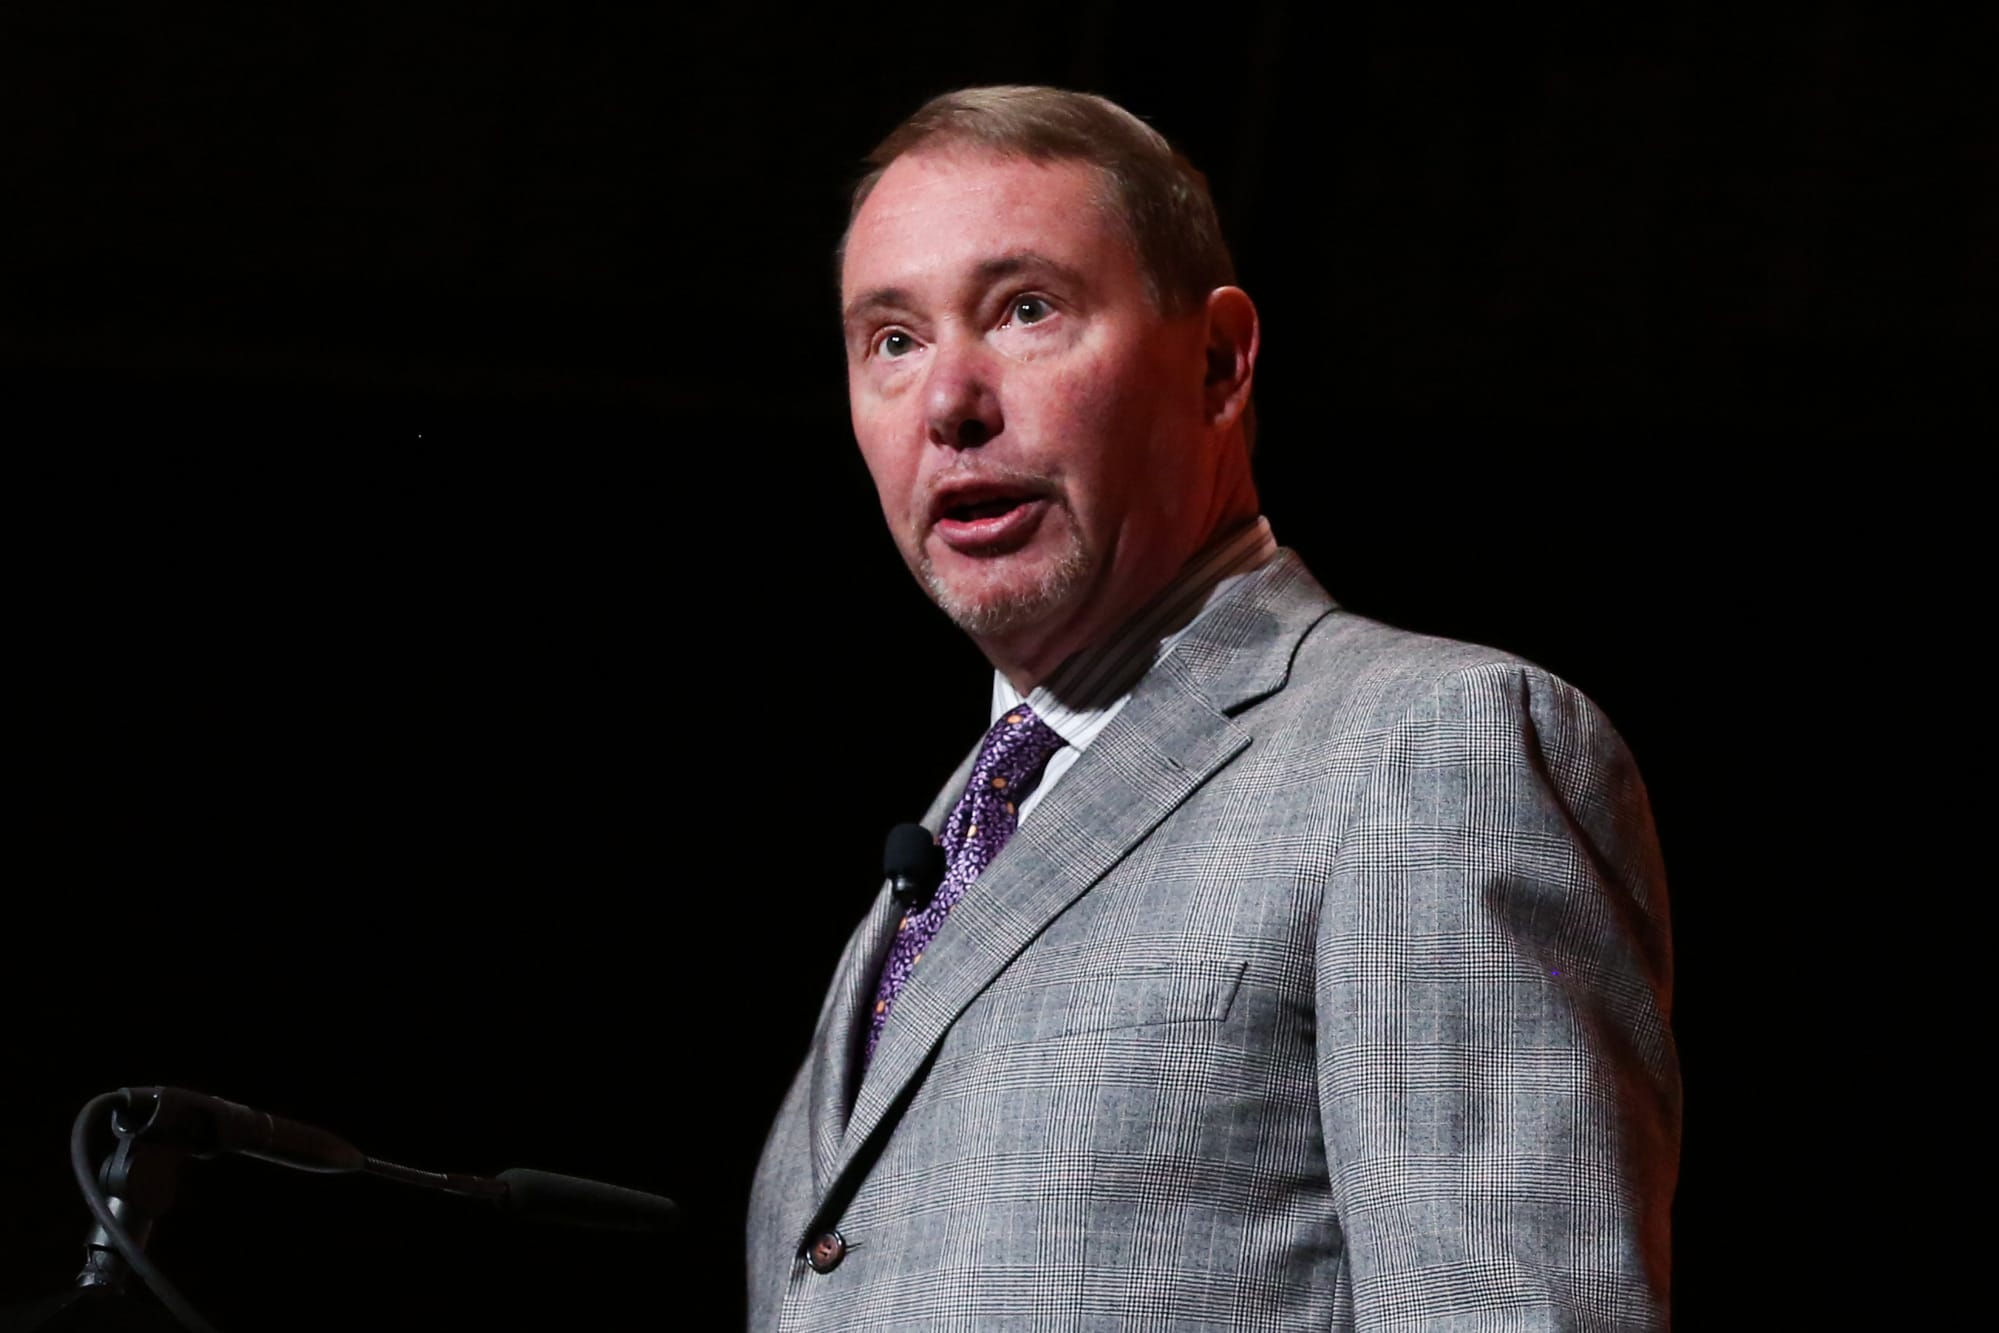 DoubleLine's Jeffrey Gundlach reveals his trading strategy in this tricky market